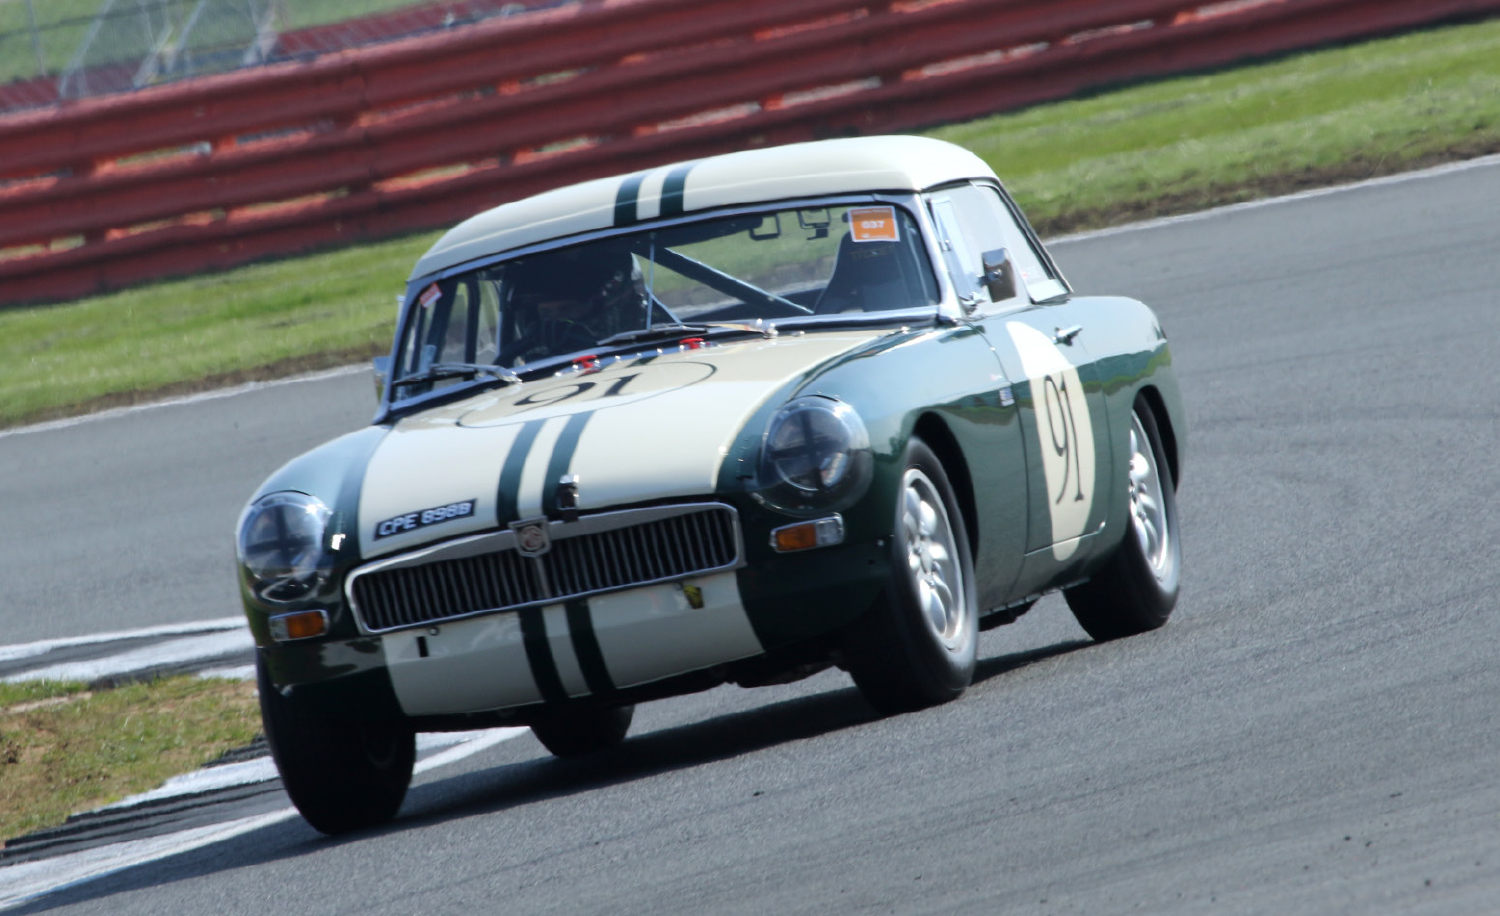 Weekend 1 round-up: Silverstone National Circuit